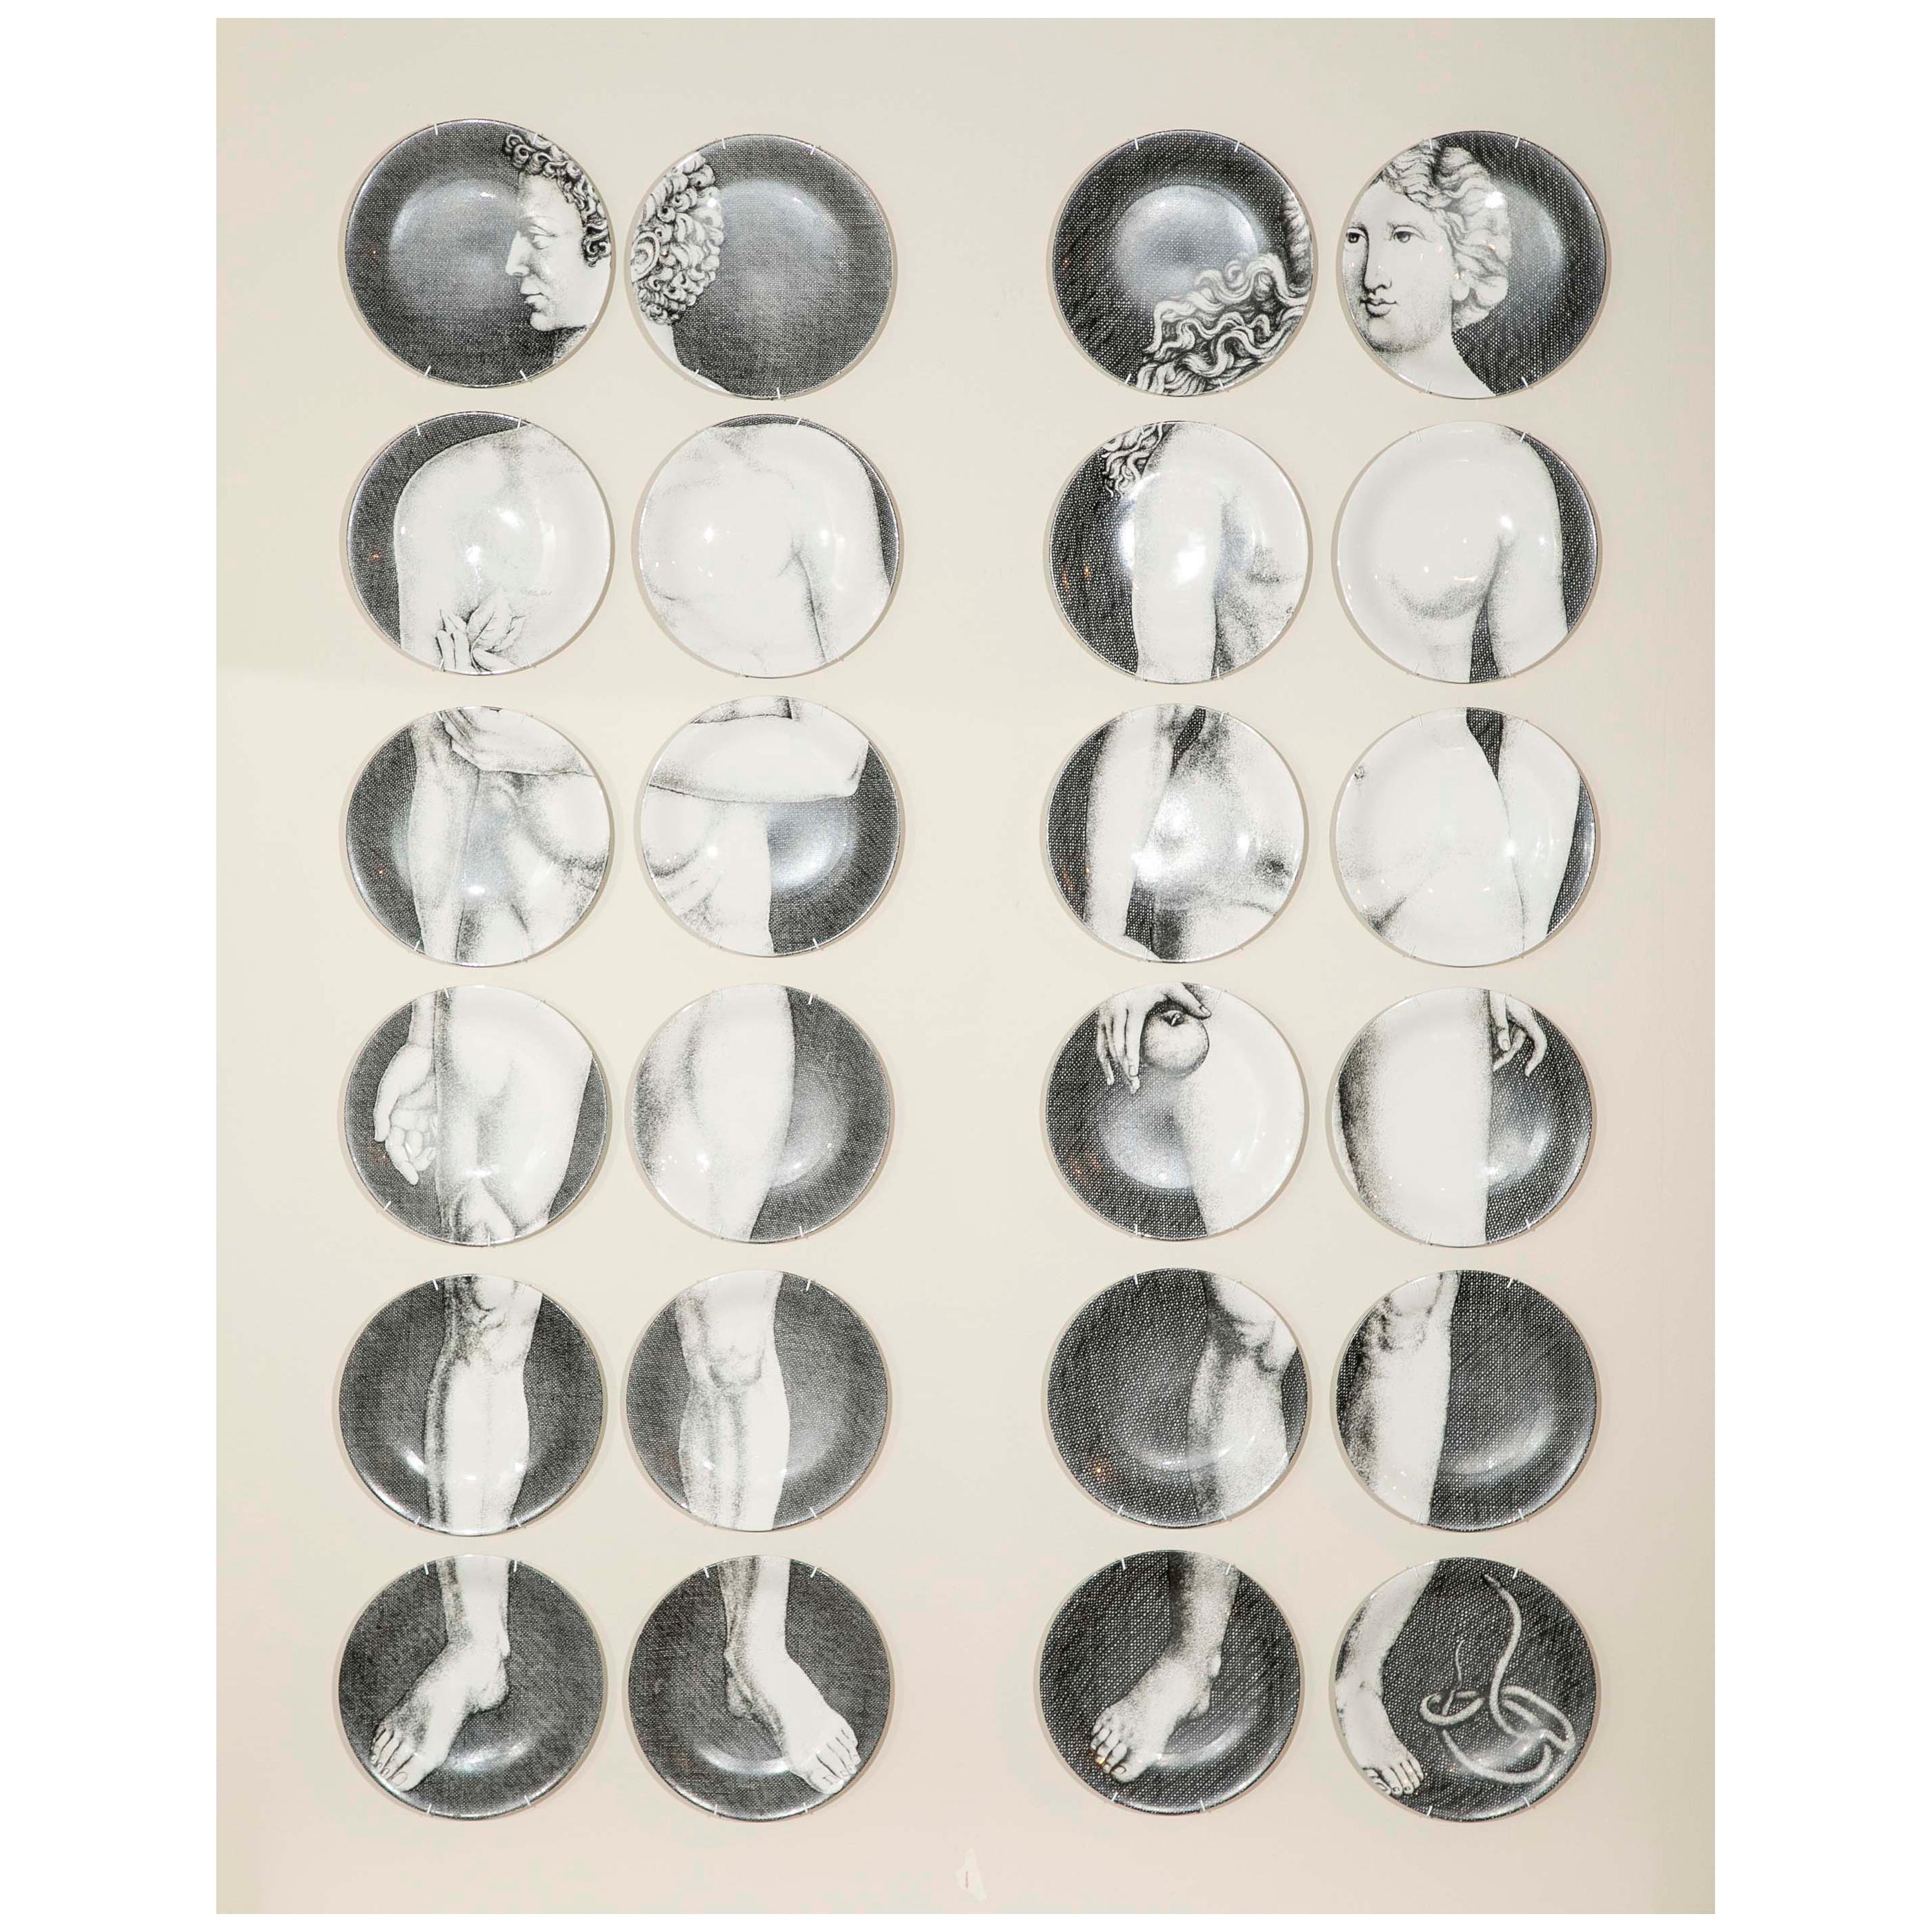 A beautiful set of 24 Pierro Fornasetti plates depicting full body images of Adam and Eve on Transfer-printed porcelain. Each plate is signed, titled and numbered: 